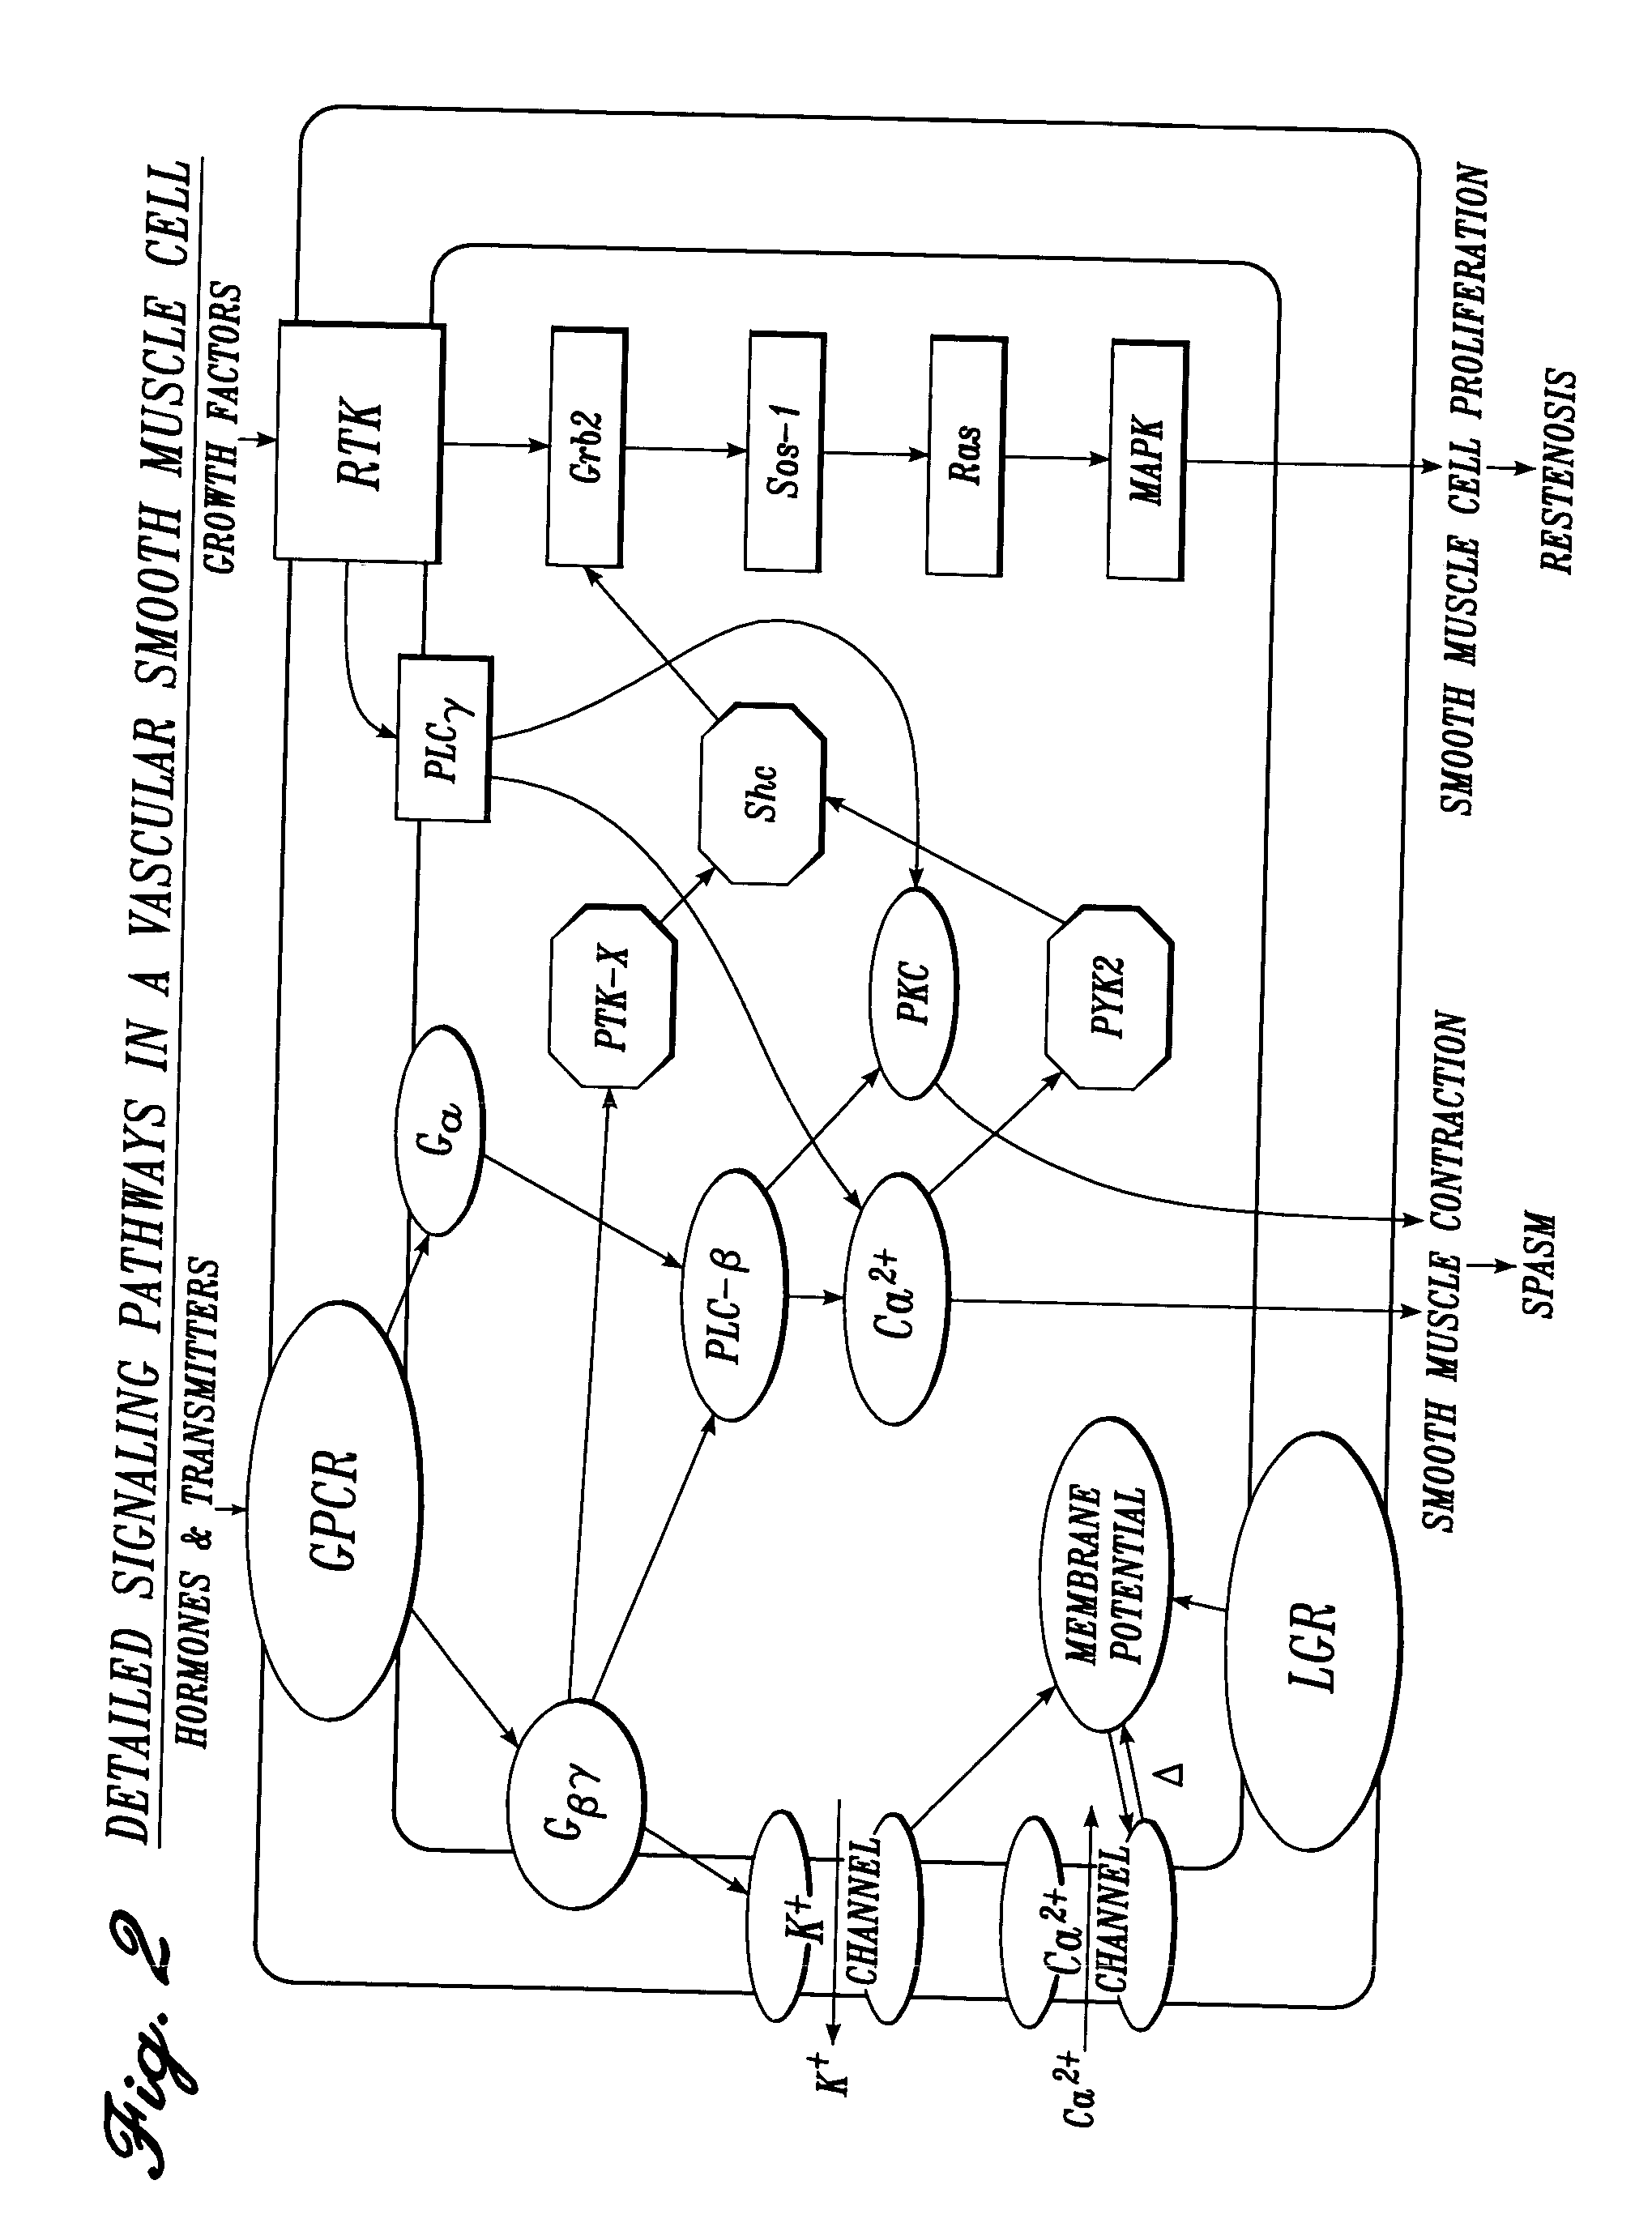 Vascular irrigation solution and method for inhibition of pain, inflammation, spasm and restenosis